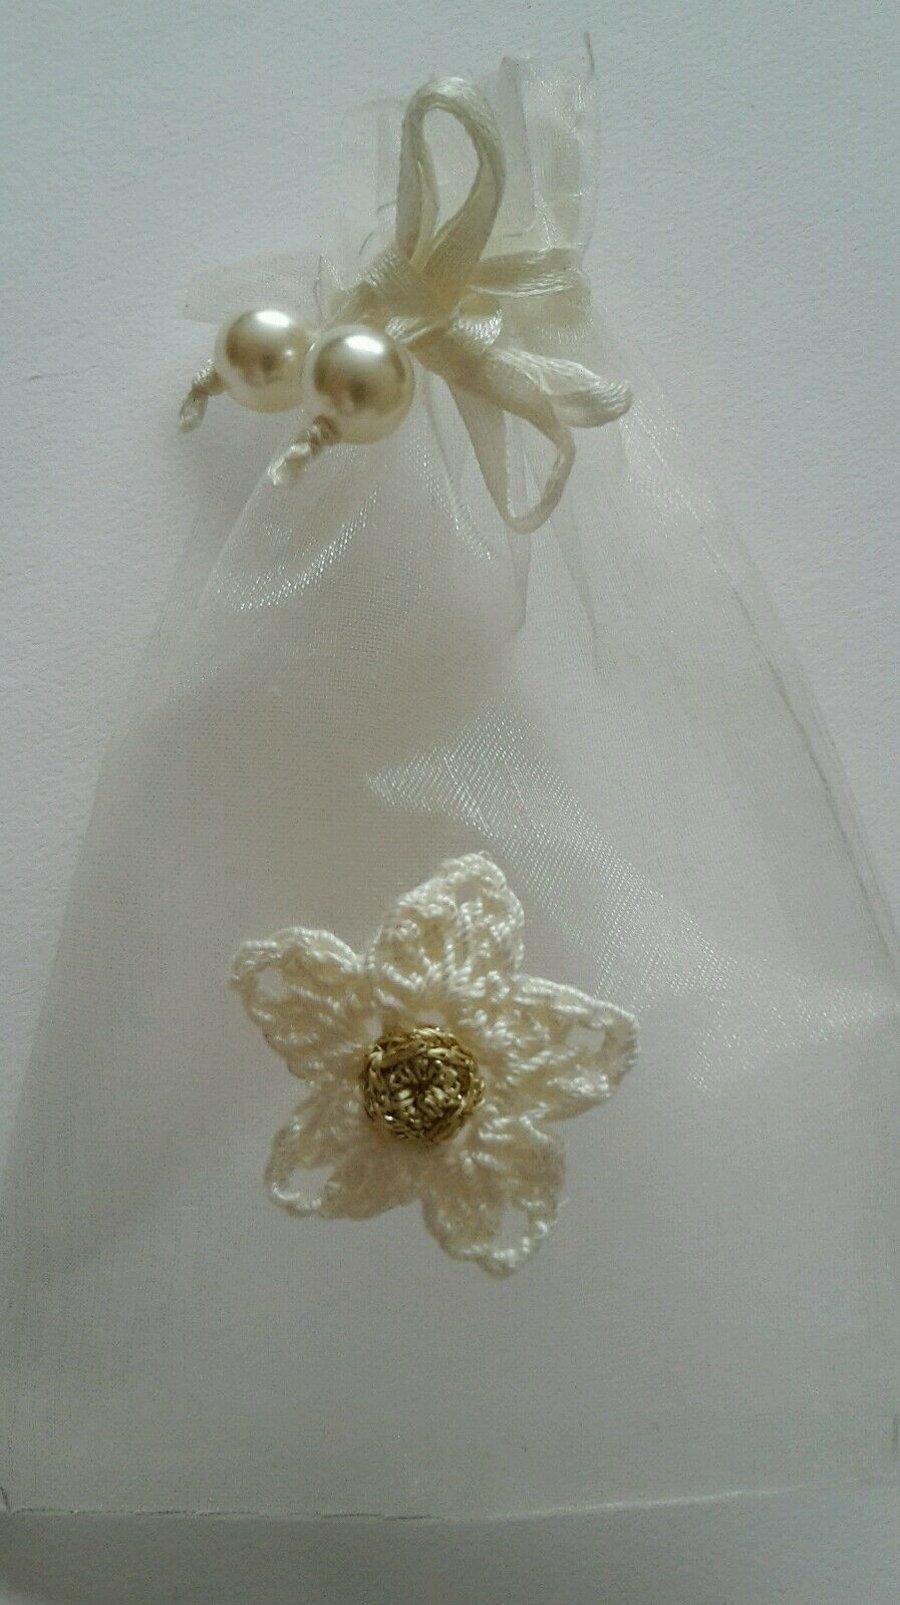 6x Cream wedding favour bags- Gifts bags- Bridal shower- Christening favour bag